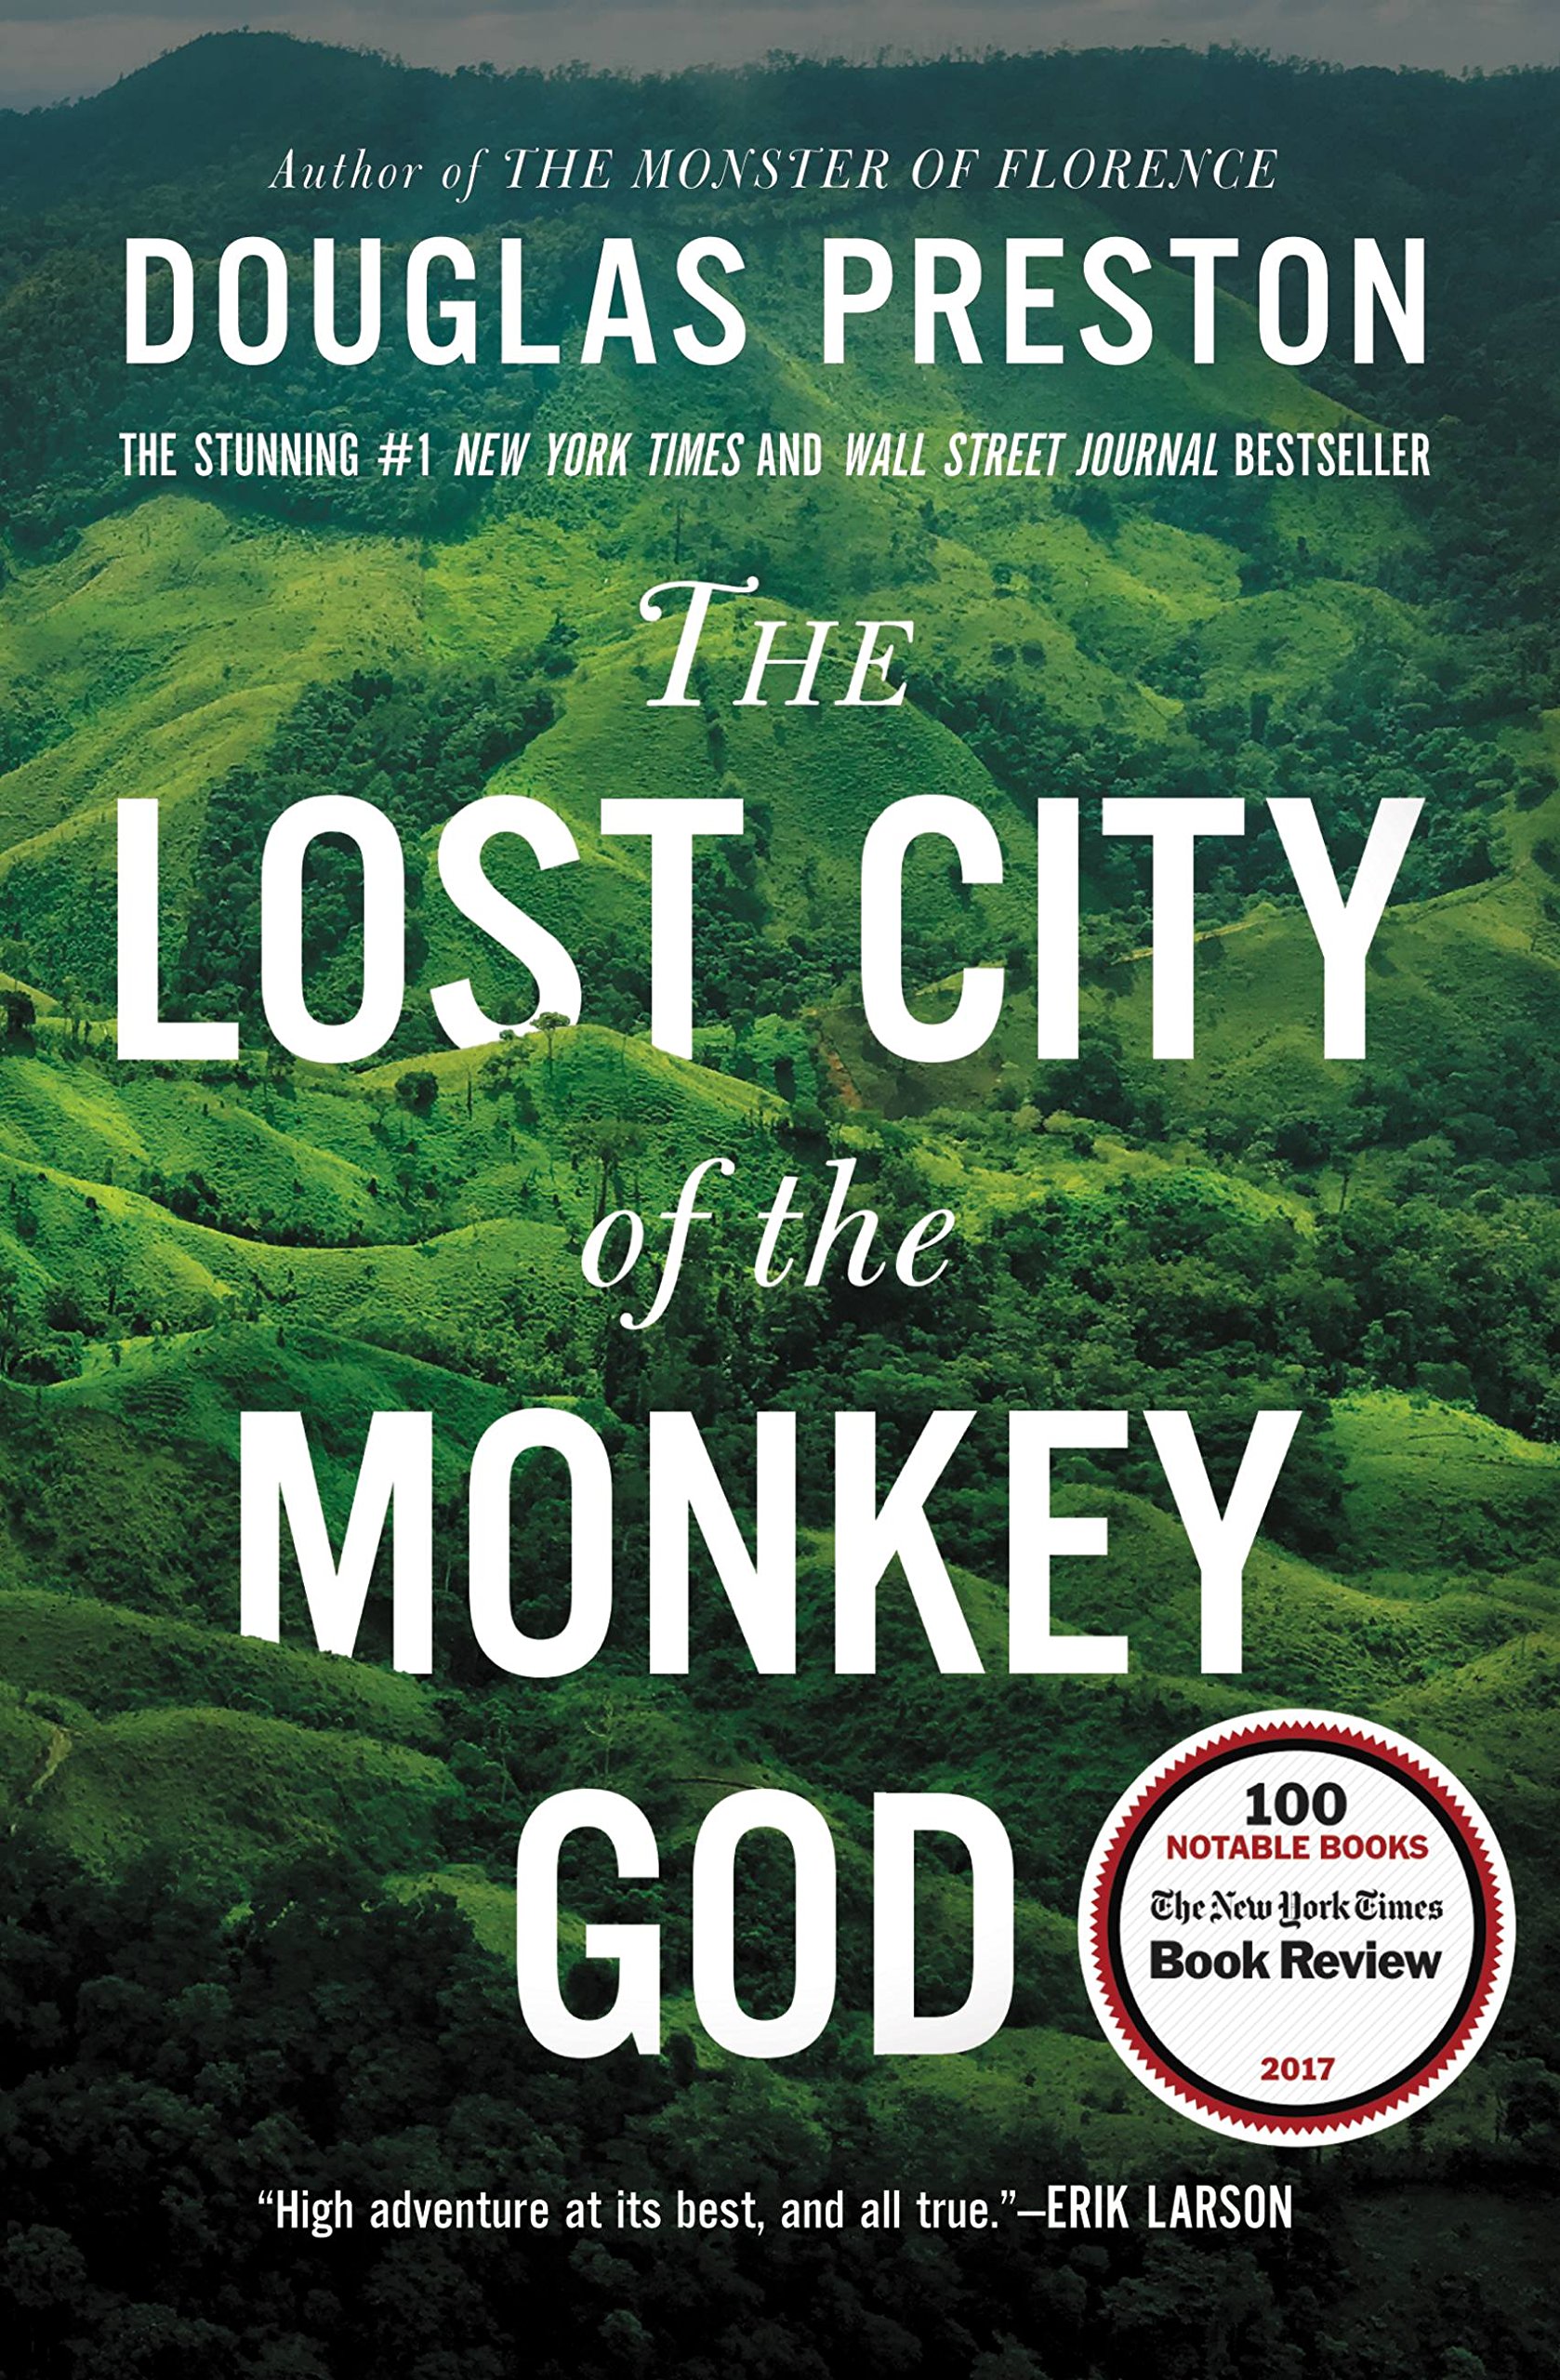 Book cover of The Lost City of the Monkey God by Douglas Preston. Background of green hills.